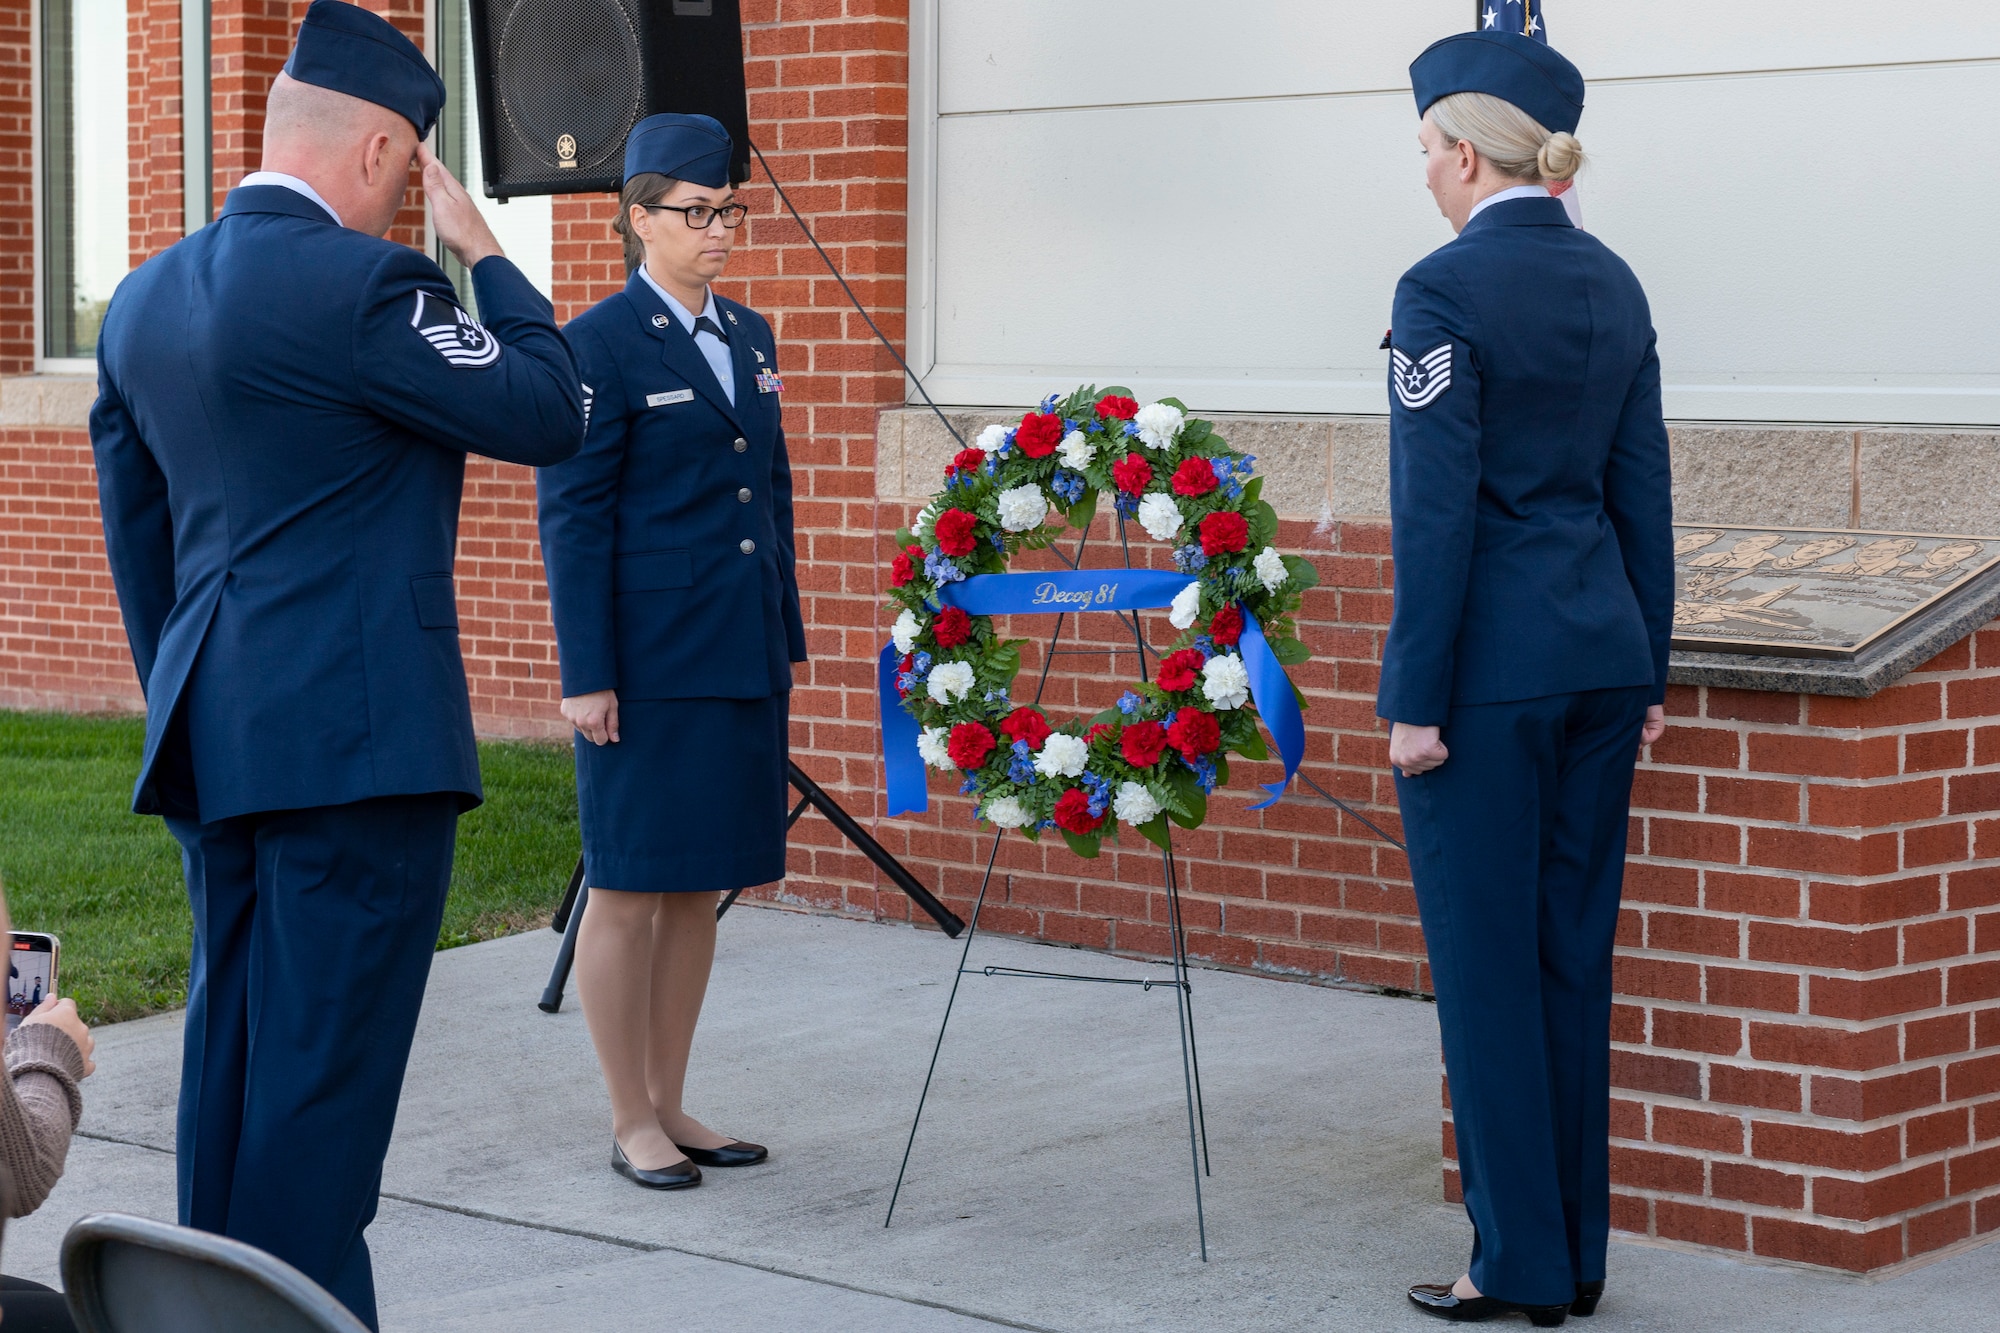 U.S. Air Force Master Sgt. Sterling Hall, Master Sgt. Breanne Spessard and Tech. Sgt. Sarah Hall, all assigned to the 167th Operations Group, place a wreath beside the Decoy 81 memorial plaque in front of the 167th Operations Group building during a memorial ceremony, Oct. 7, 2022, at the 167th Airlift Wing, Martinsburg, West Virginia.